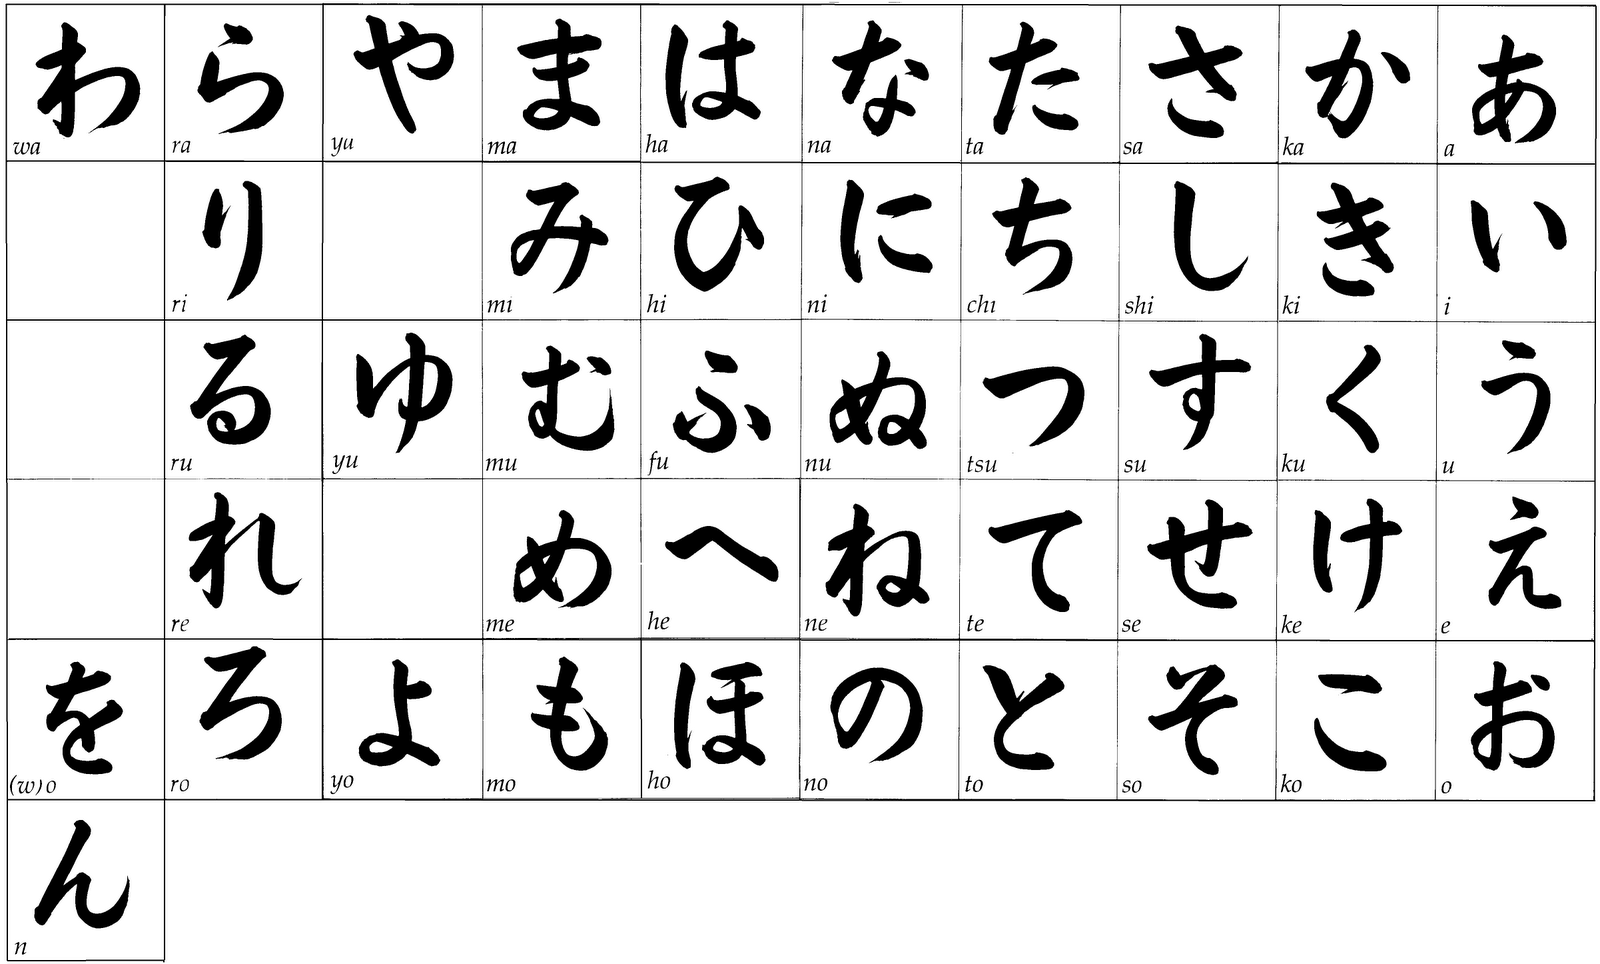 List of Synonyms and Antonyms of the Word: japanese kanji alphabet